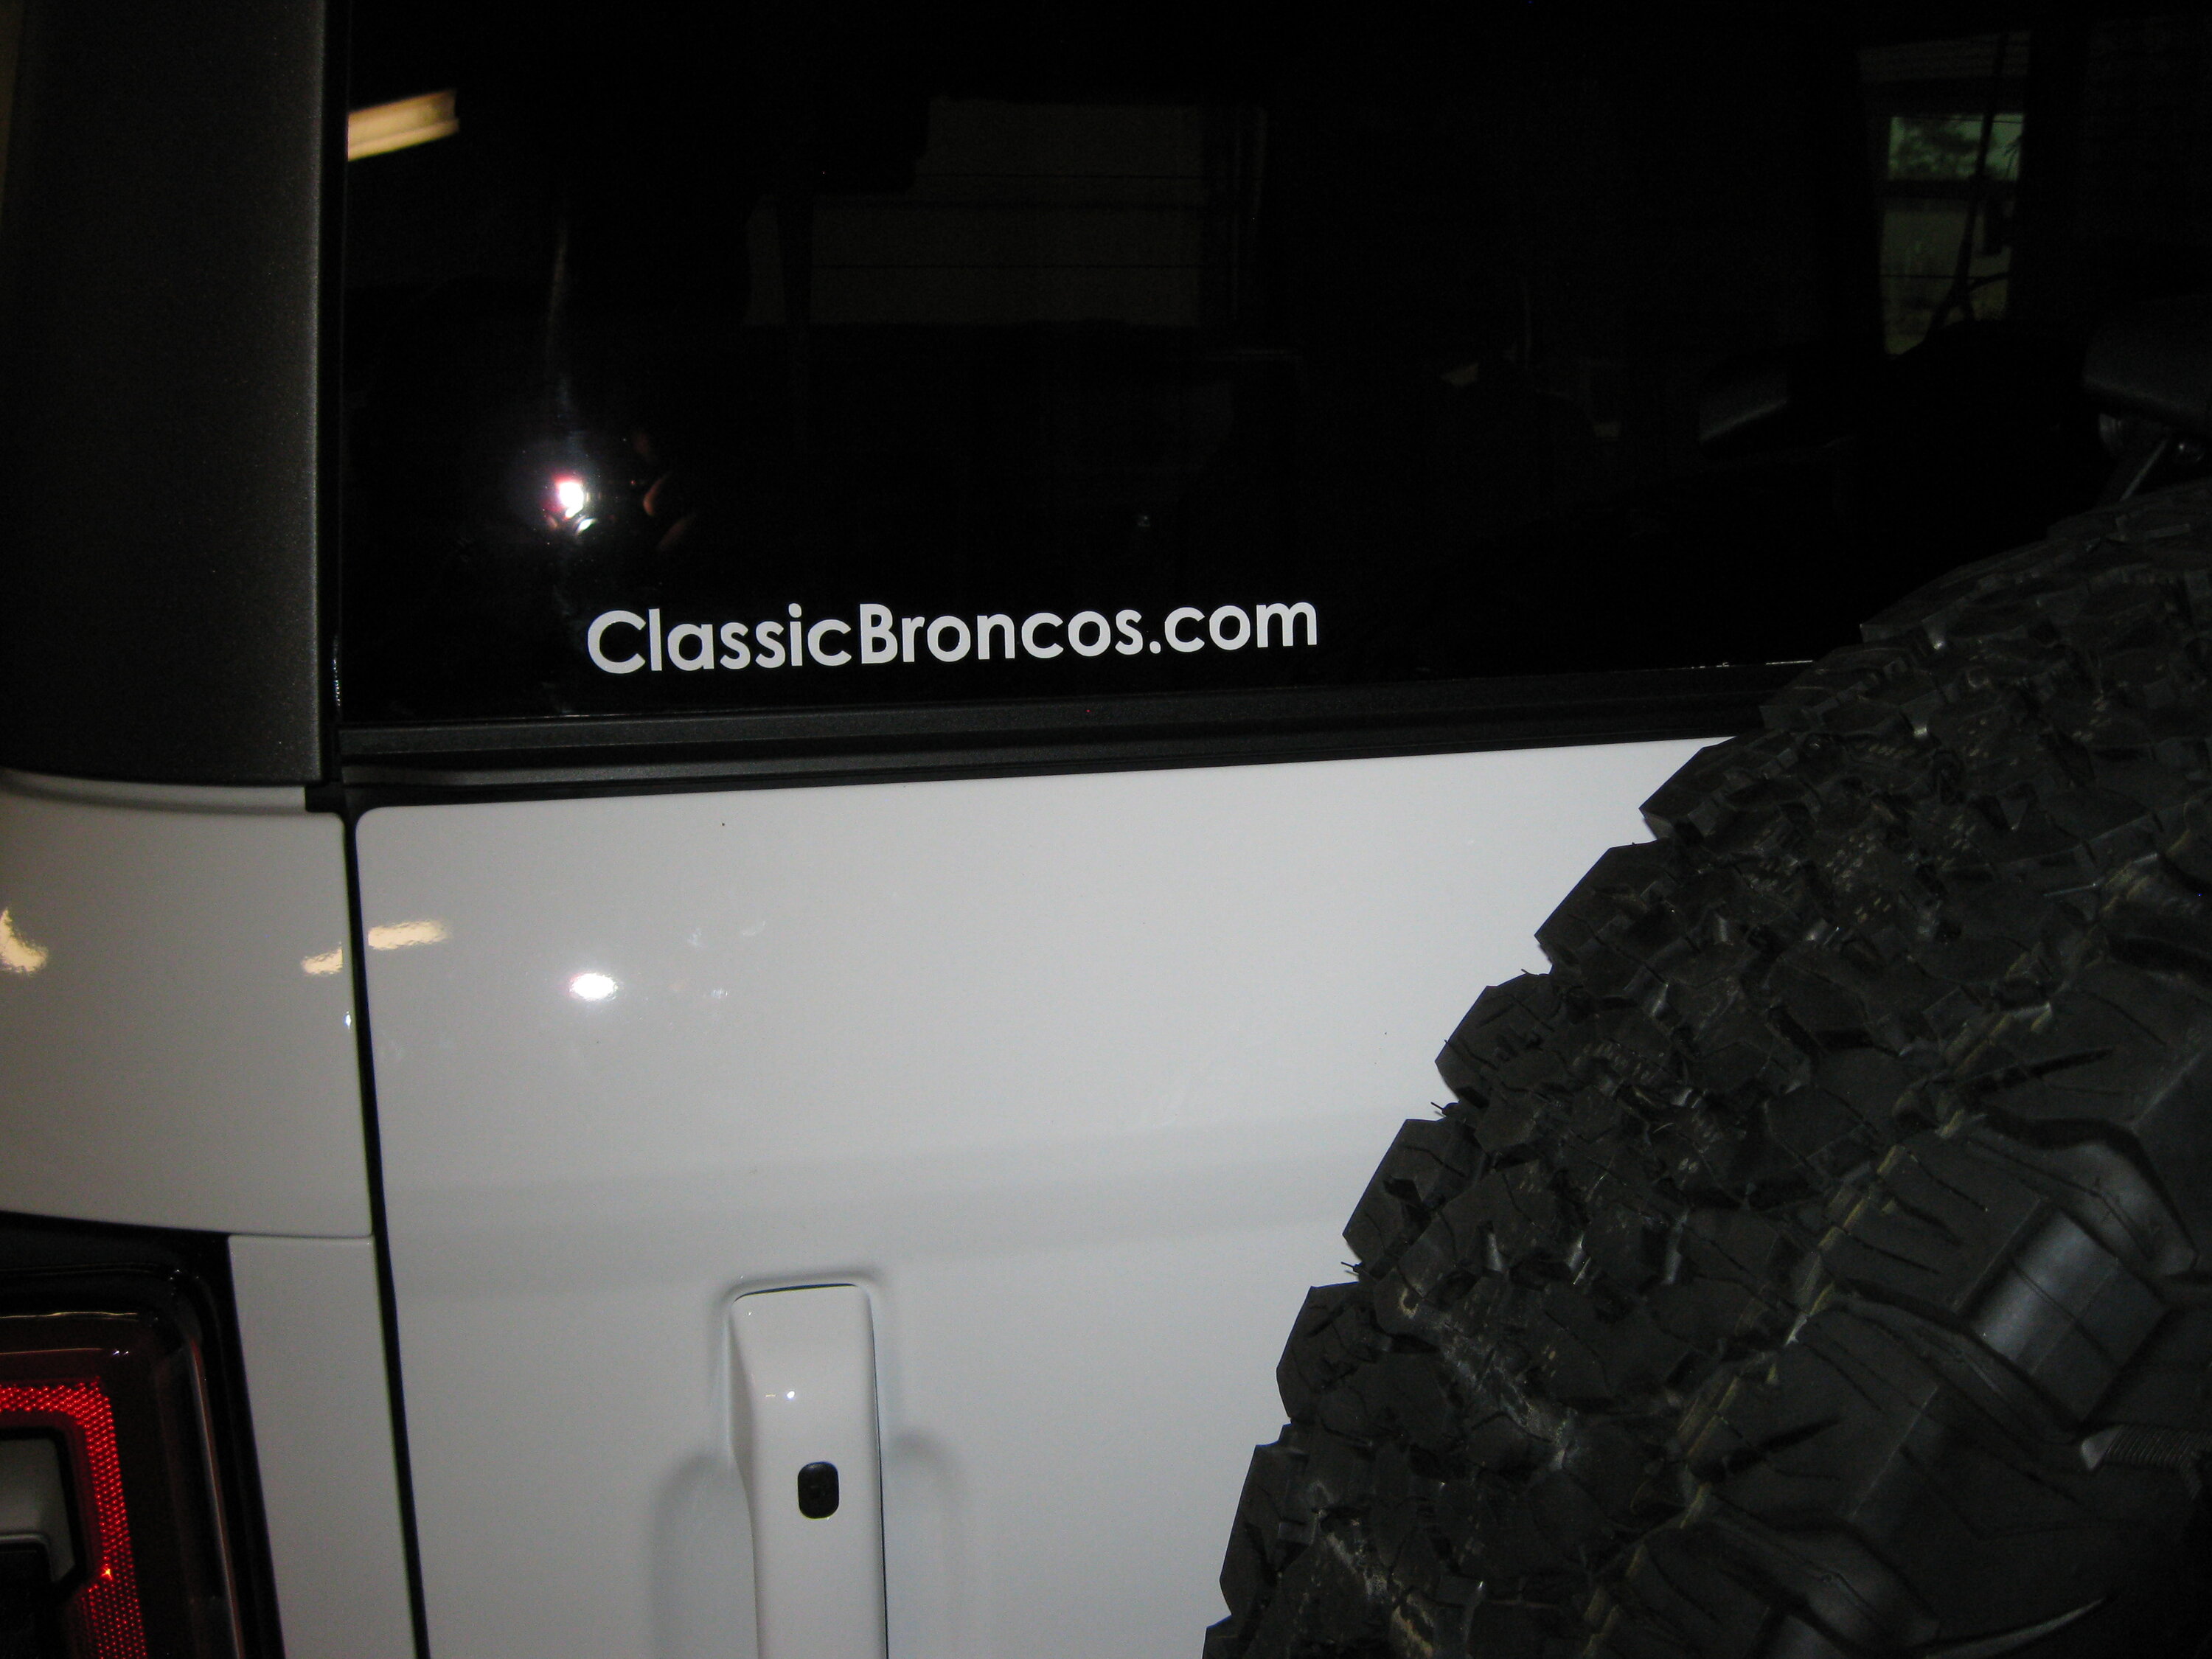 Ford Bronco Have you put Stickers on your Bronco? Let's see them 2022-02-13 00.17.13